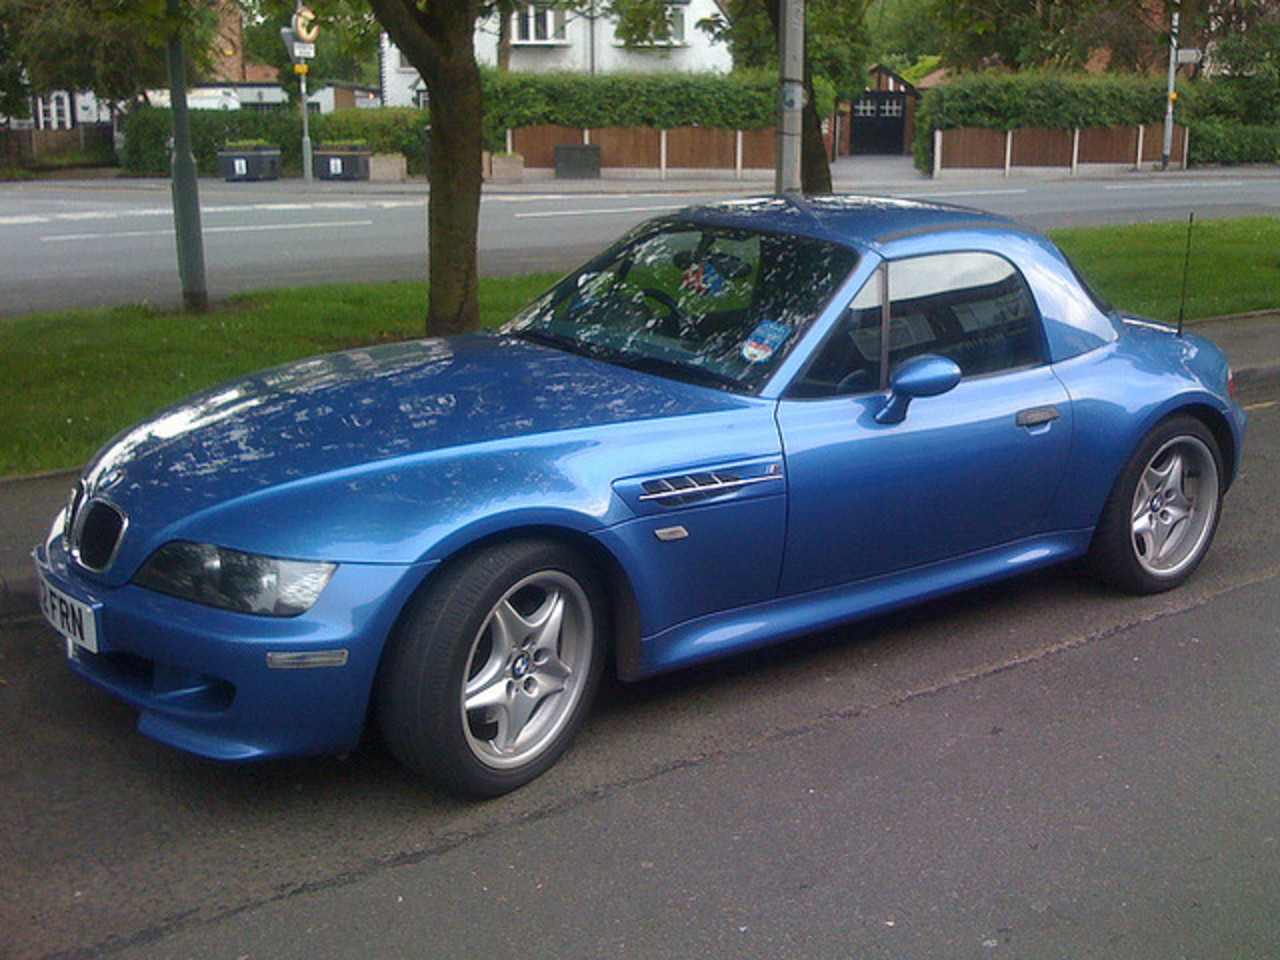 BMW Z3 M Roadster - a gallery on Flickr